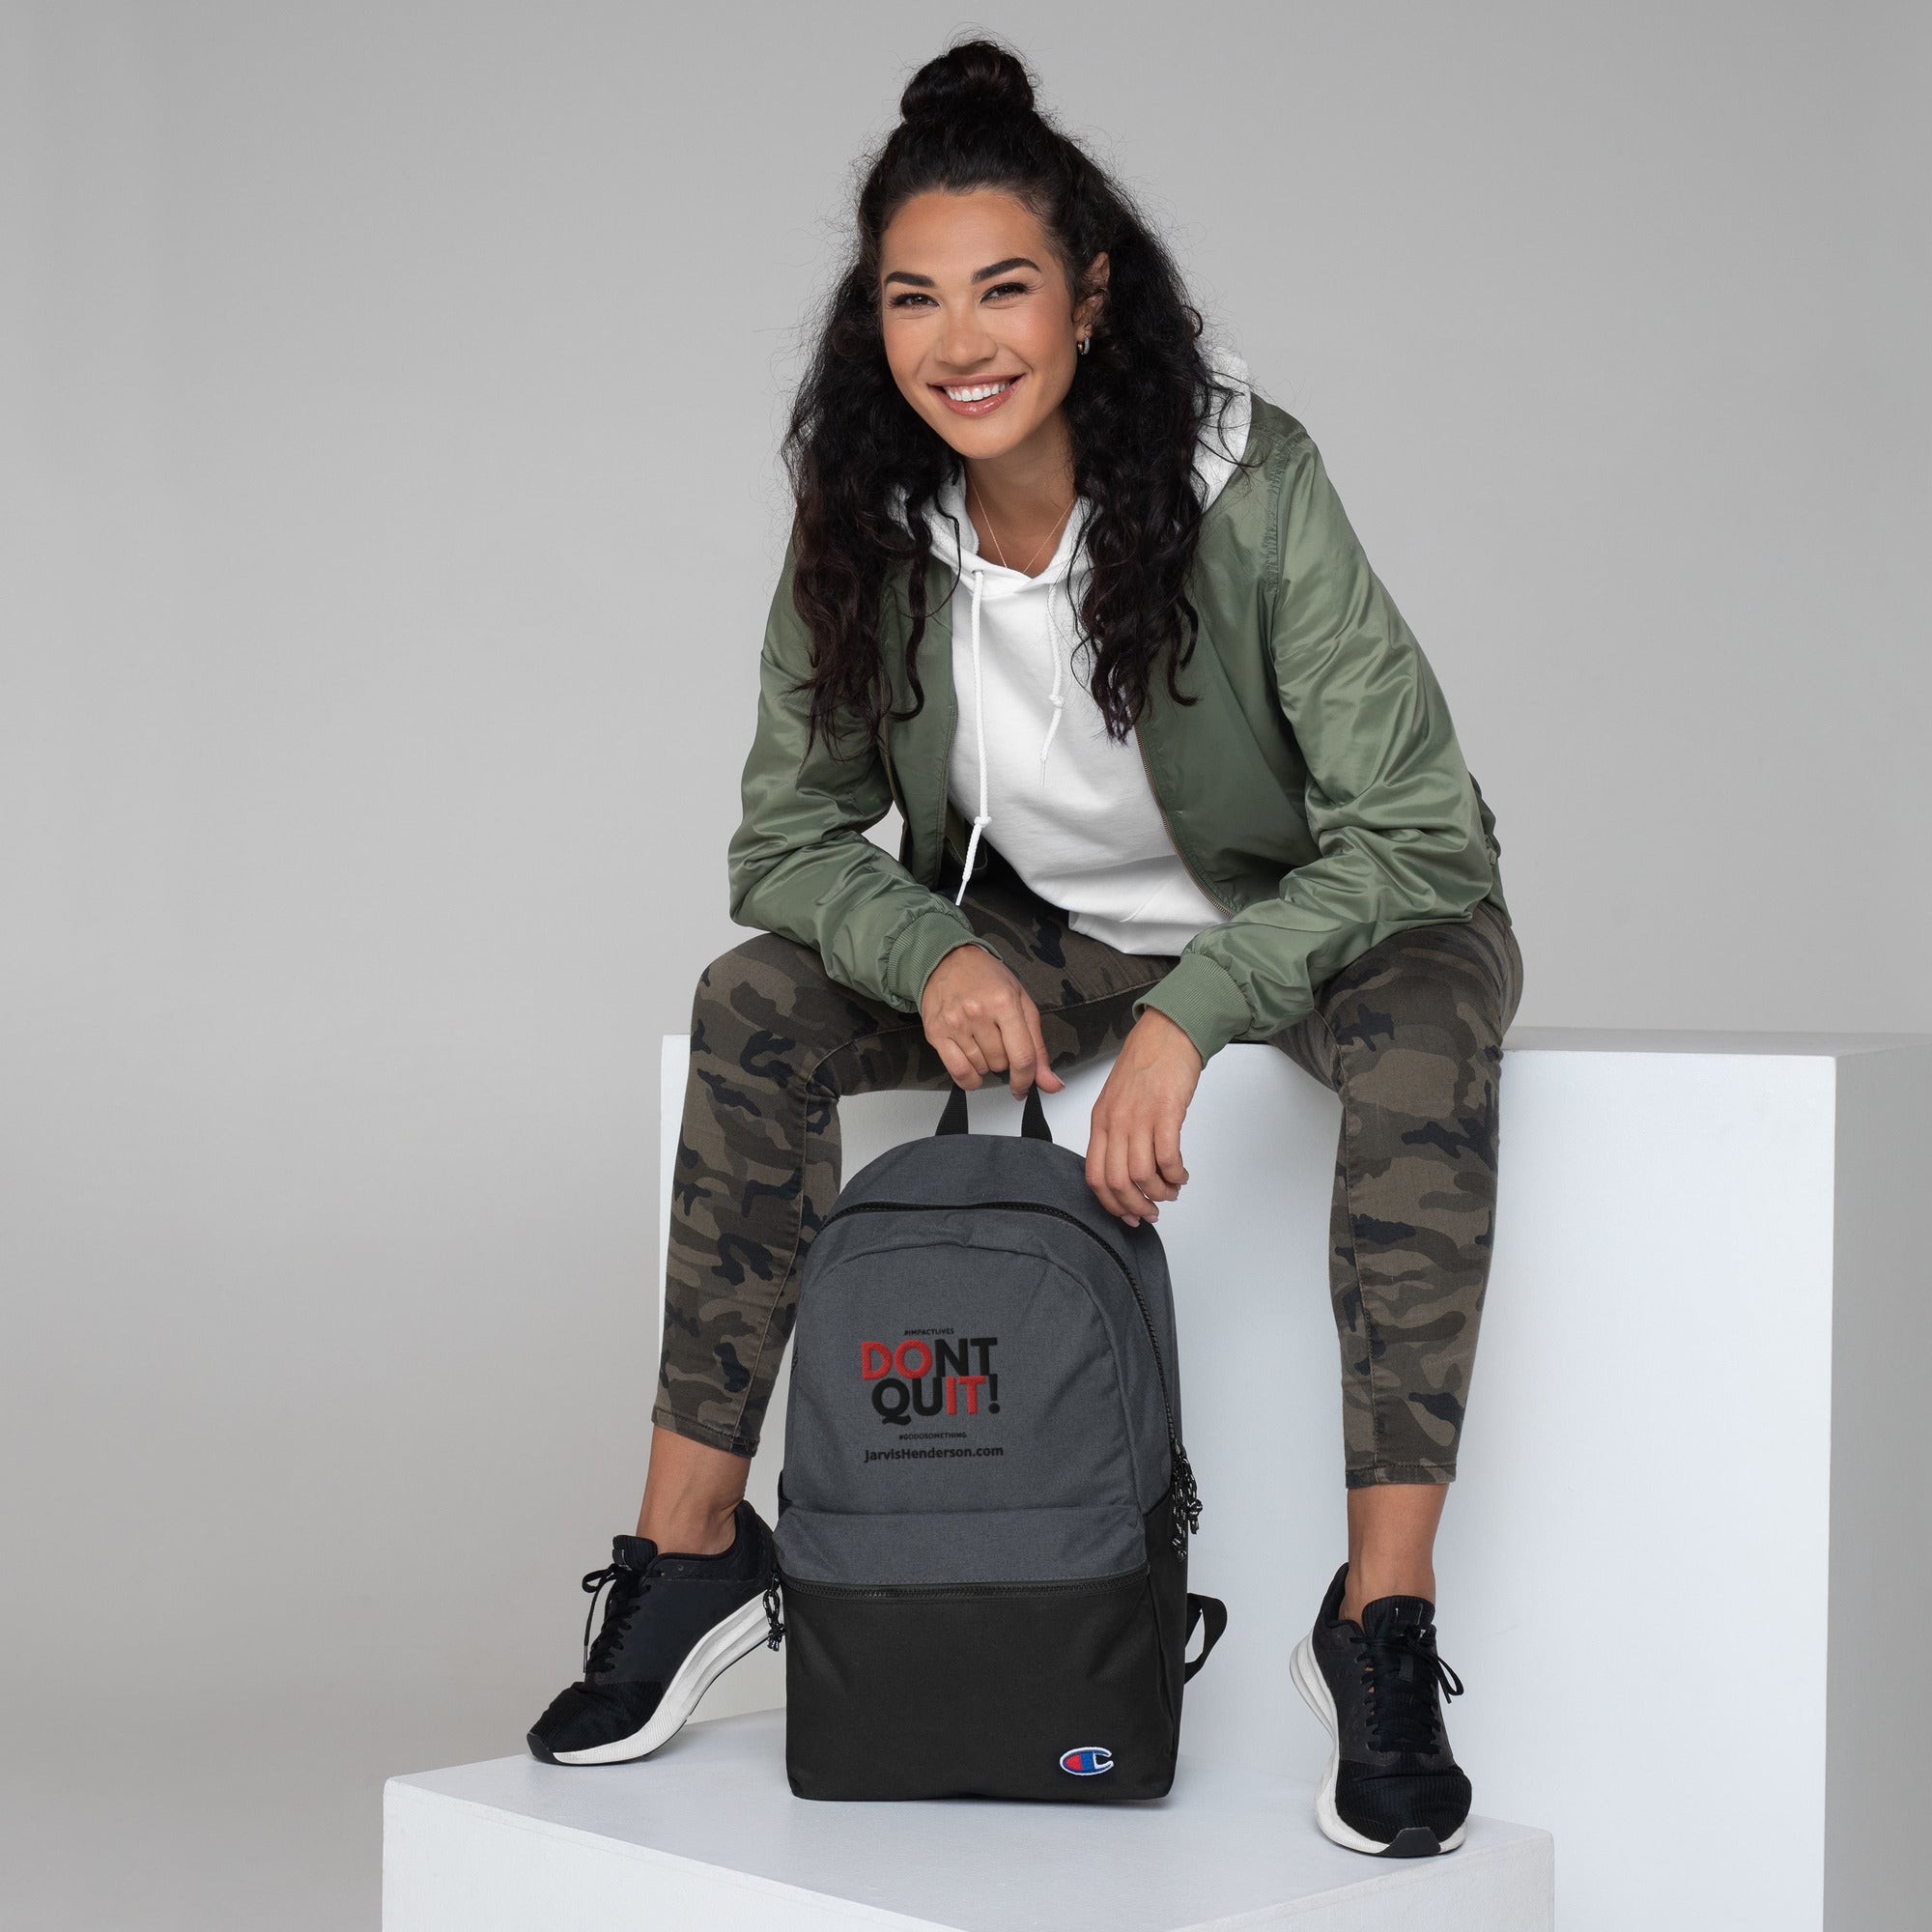 Don't Quit Embroidered Champion Backpack